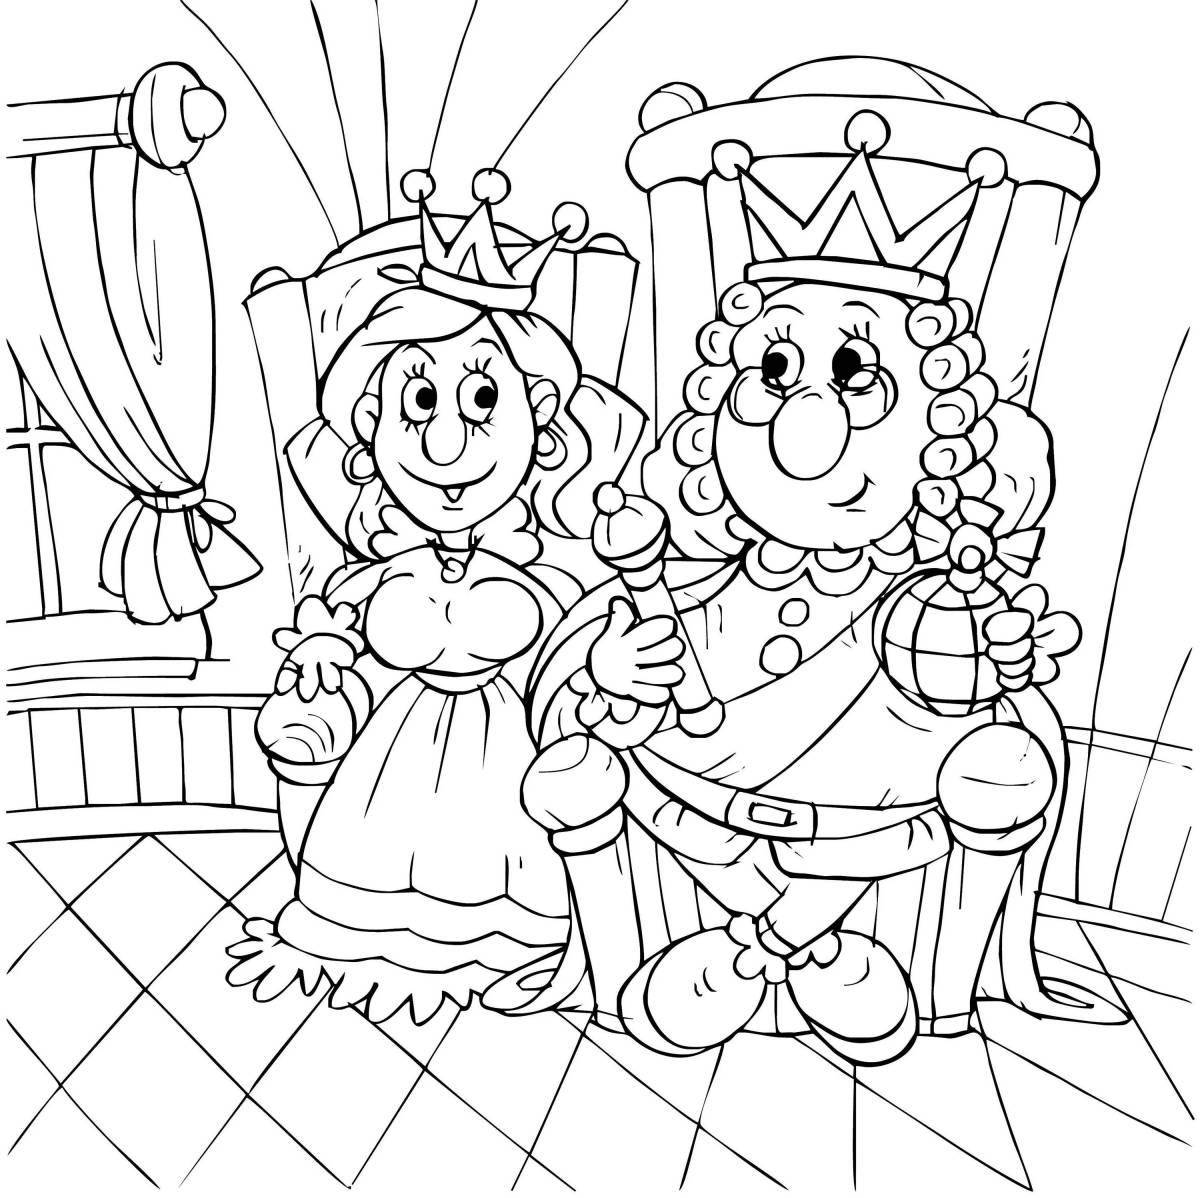 Majestic king and queen coloring page